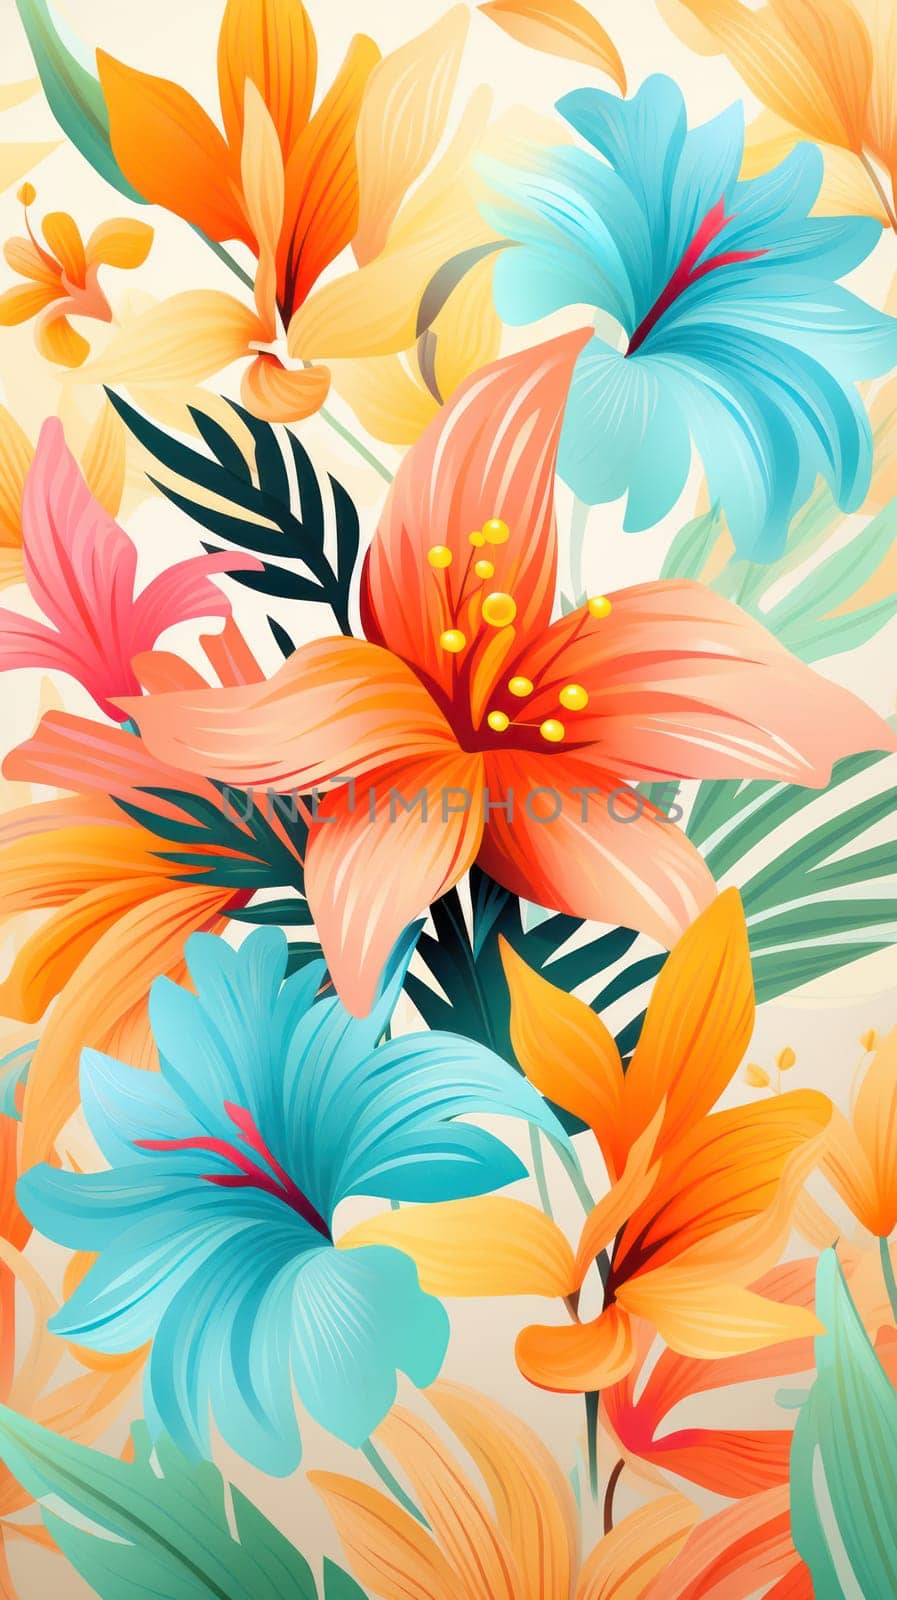 Abstract Floral Paradise: Colorful Tropical Flower Pattern on Seamless Summer Wallpaper Background by Vichizh